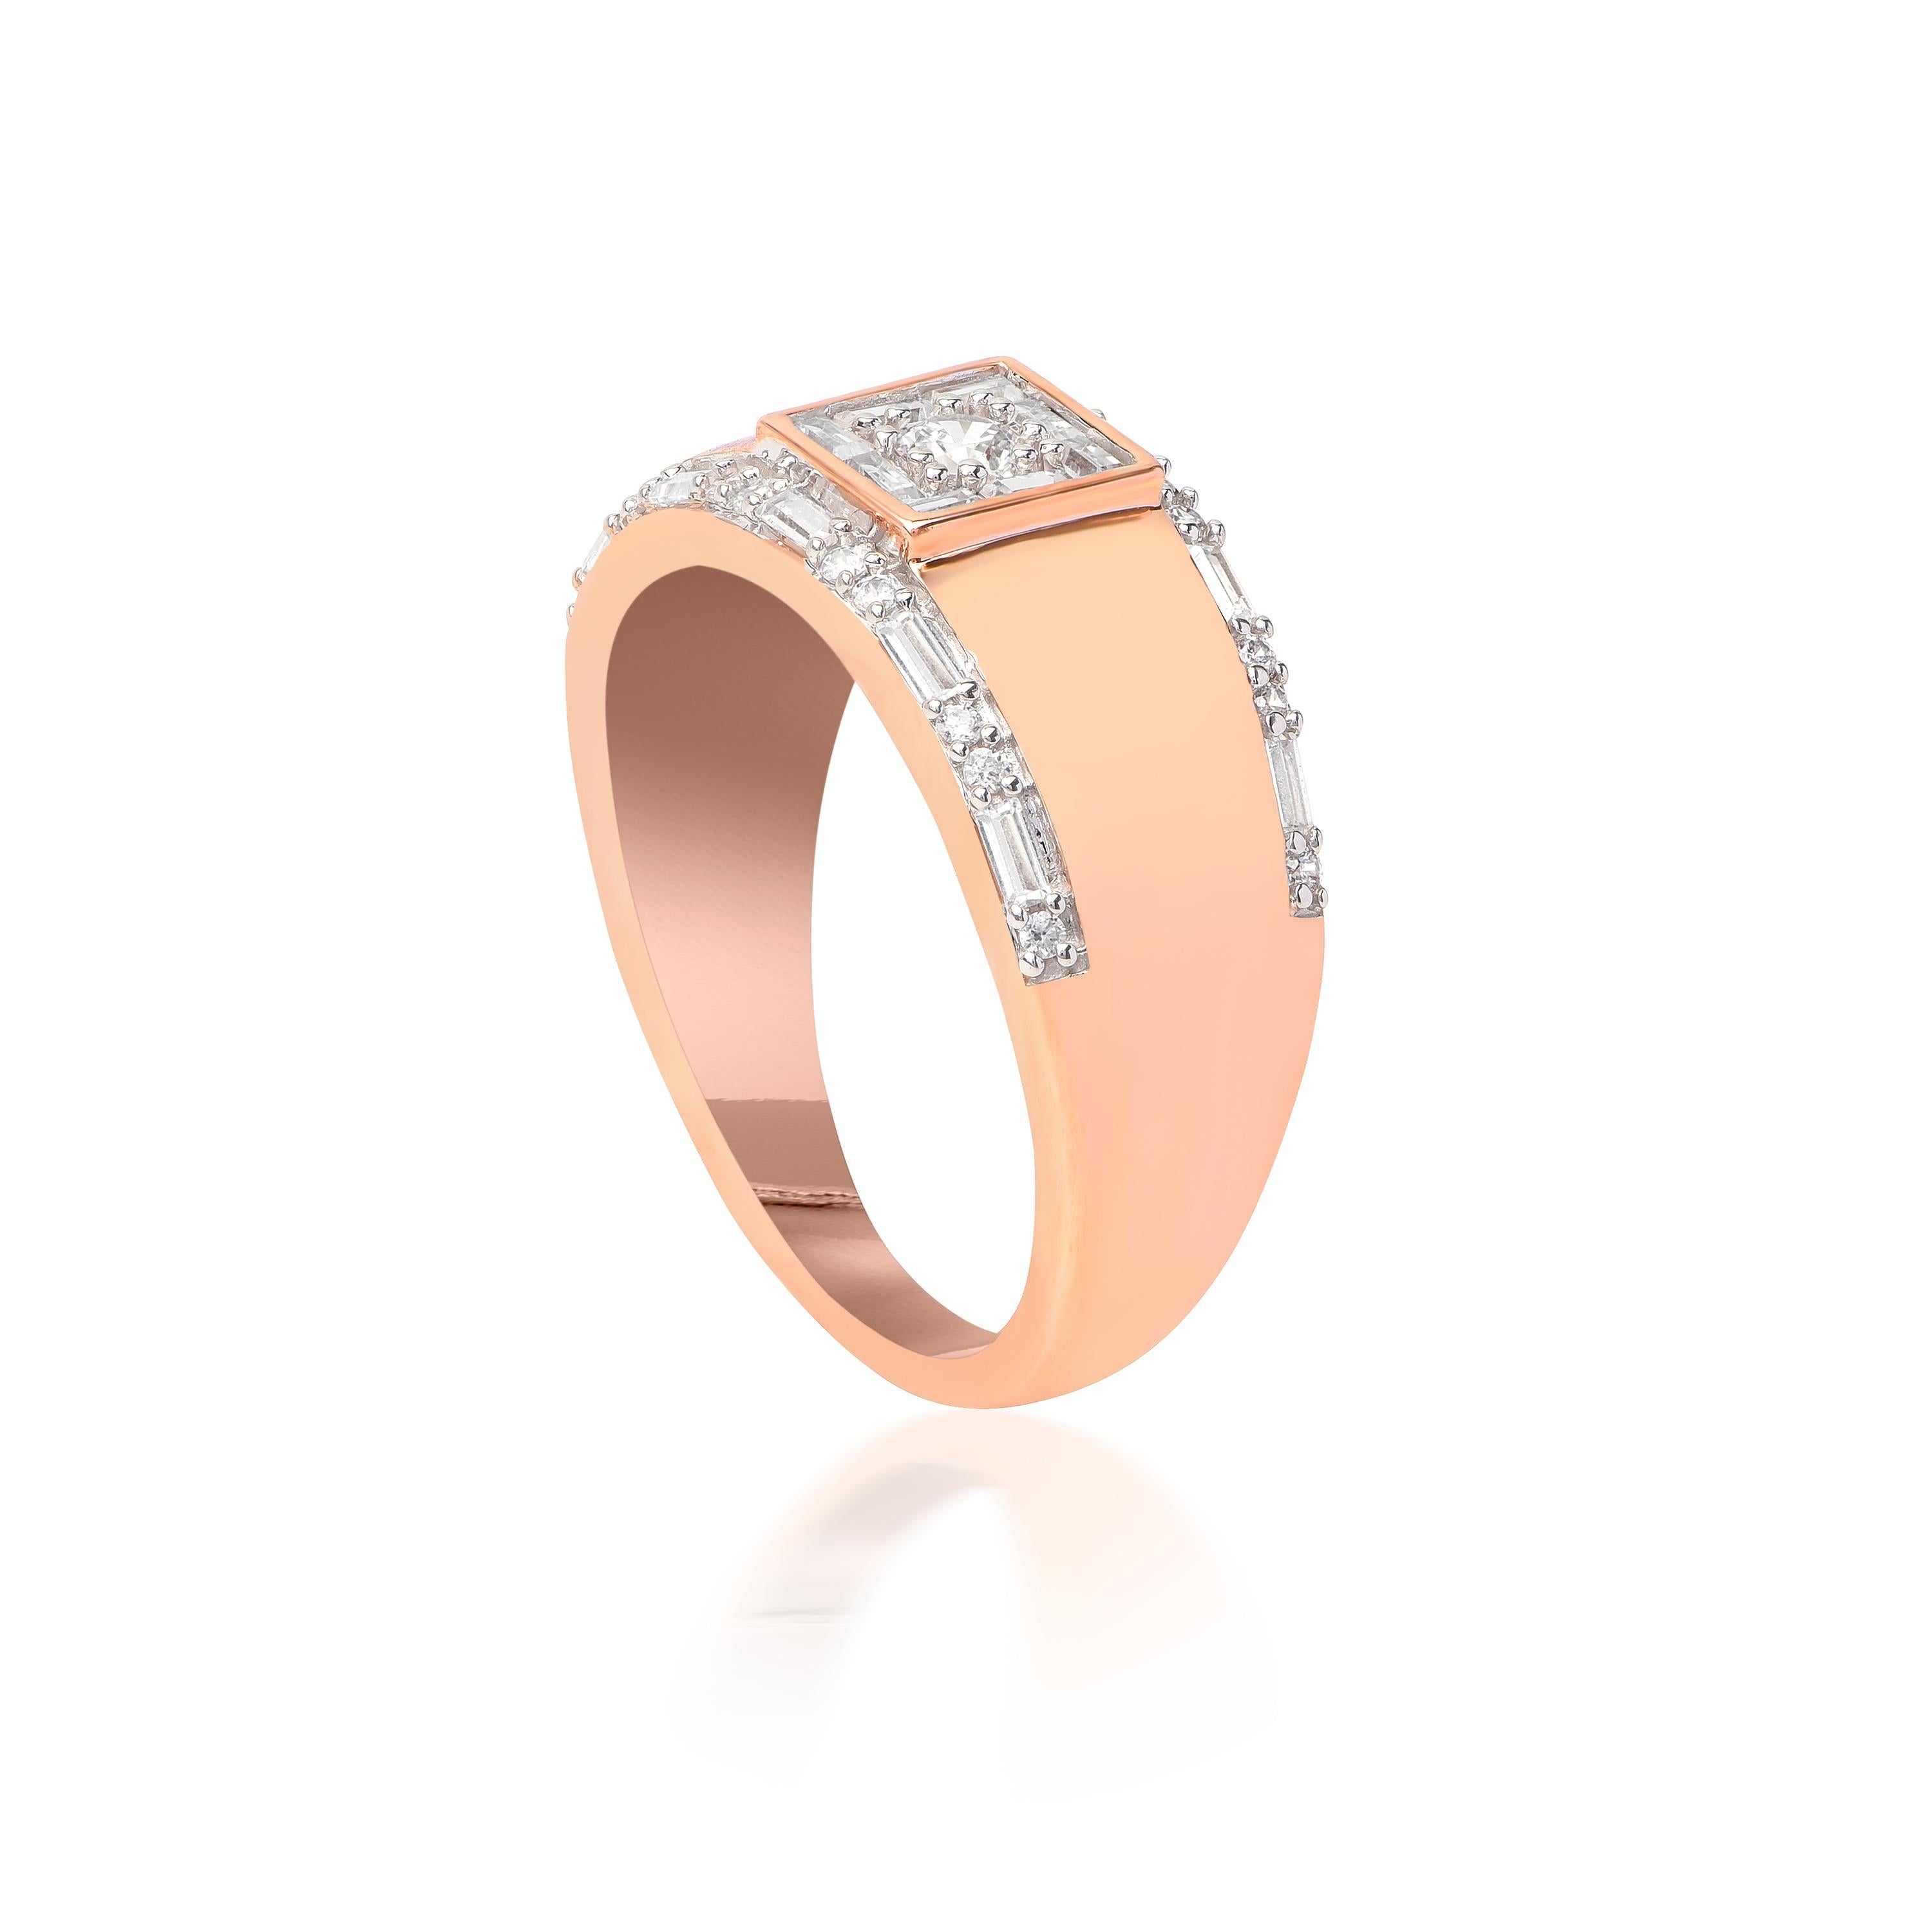 This dazzling ring is studded with 21 brilliant cut diamonds and 18 baguette diamonds in channel and prong setting and designed in 18-karat Rose Gold. H-I Color, I2 Clarity.